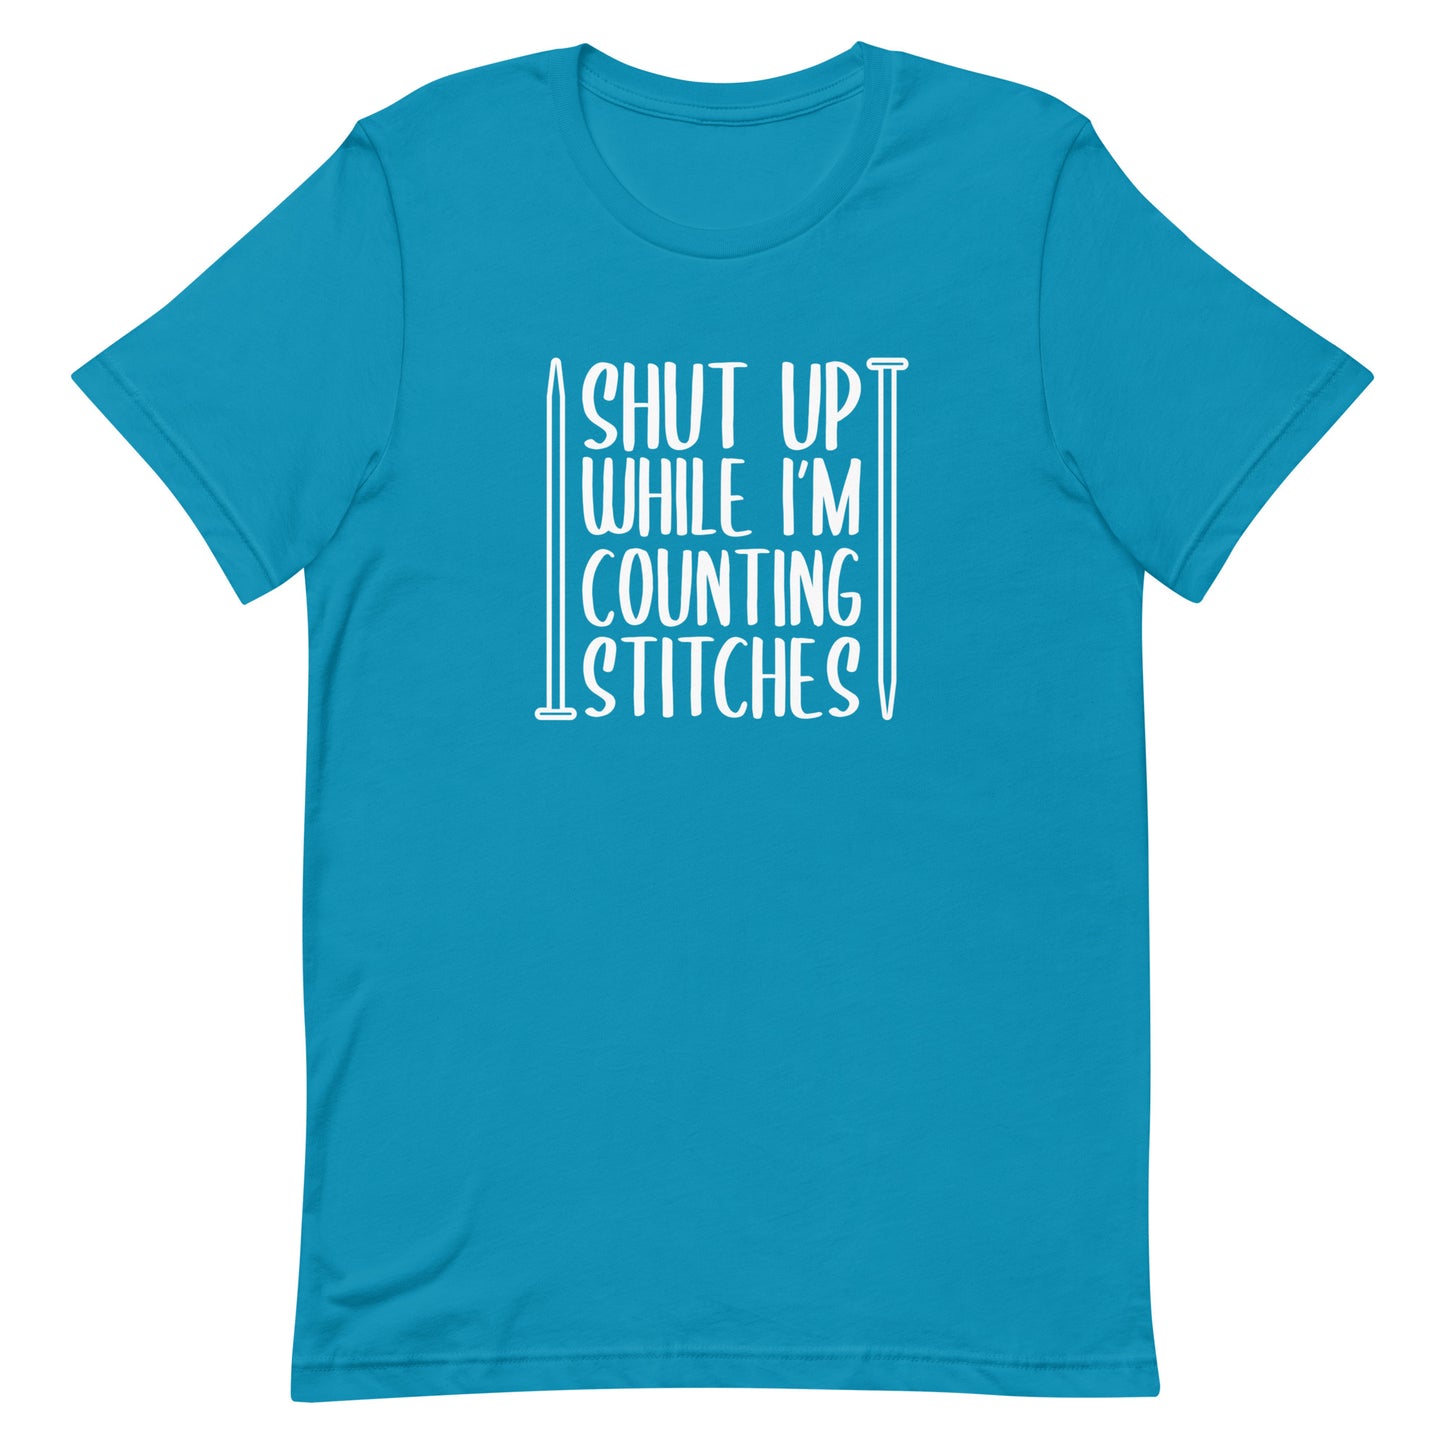 A blue t-shirt with white text surrounded by two knitting needles. The text reads "Shut up while I'm counting stiches".